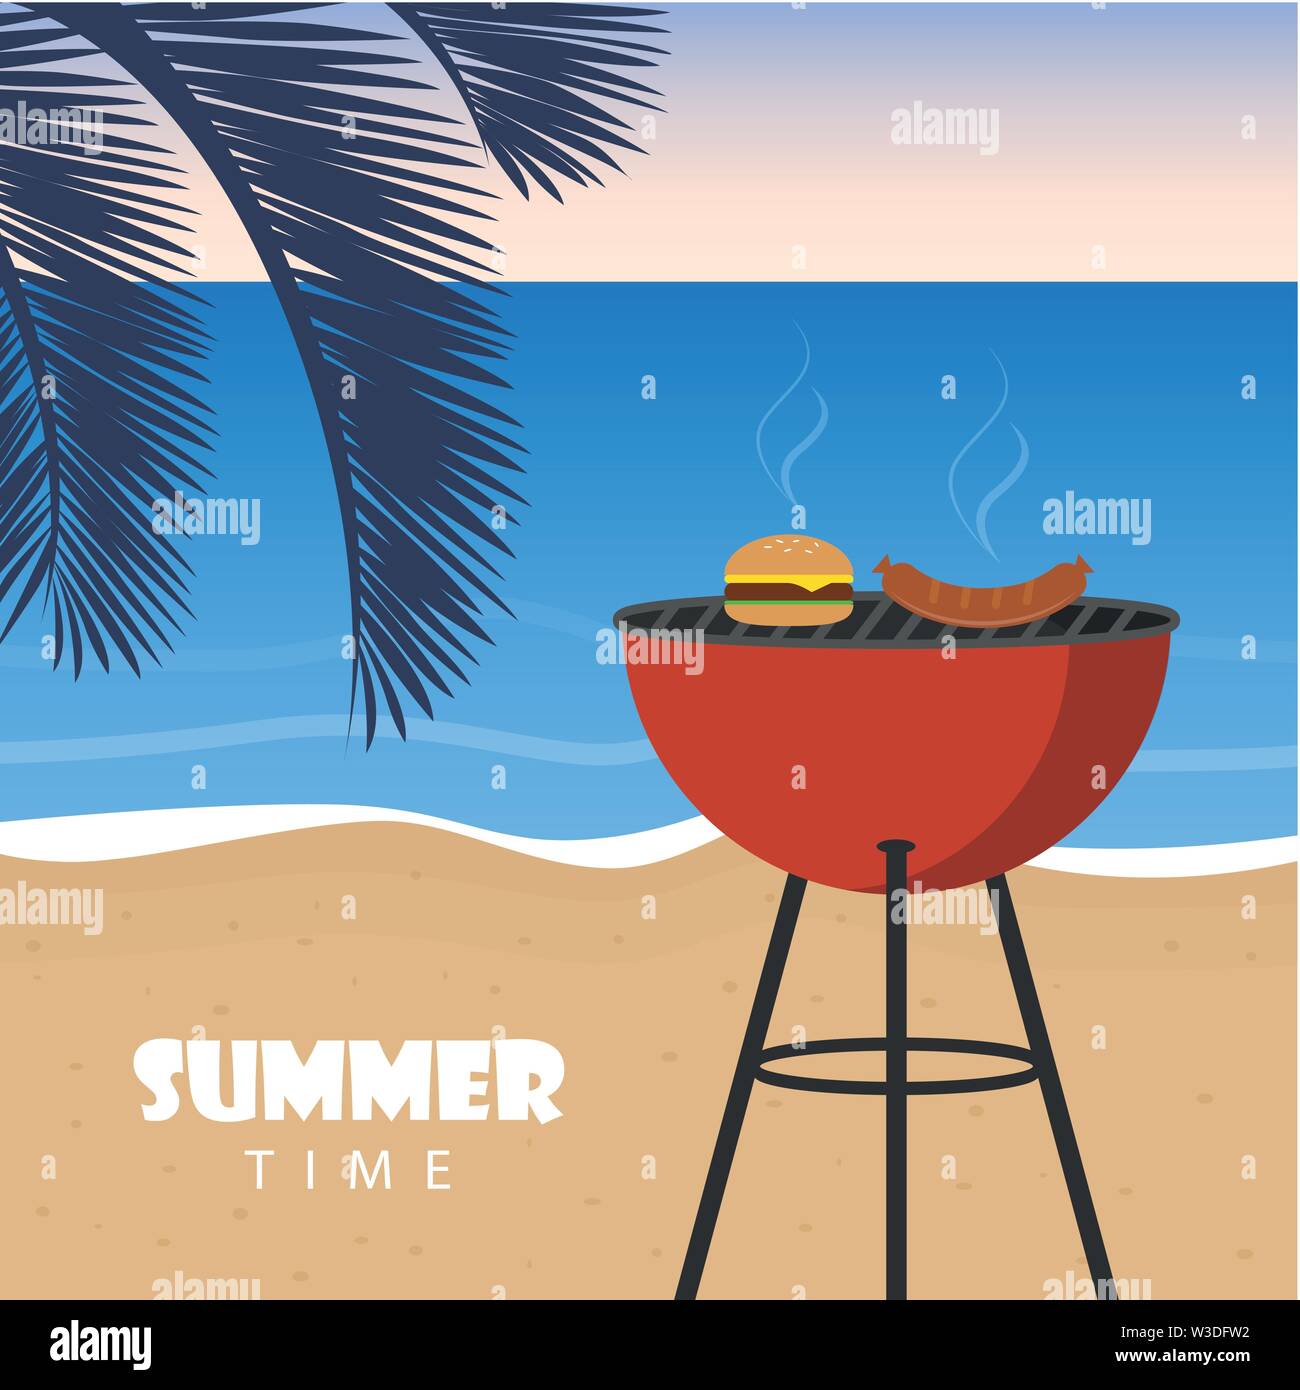 summer time barbeque on the beach with palm leaf vector illustration EPS10 Stock Vector